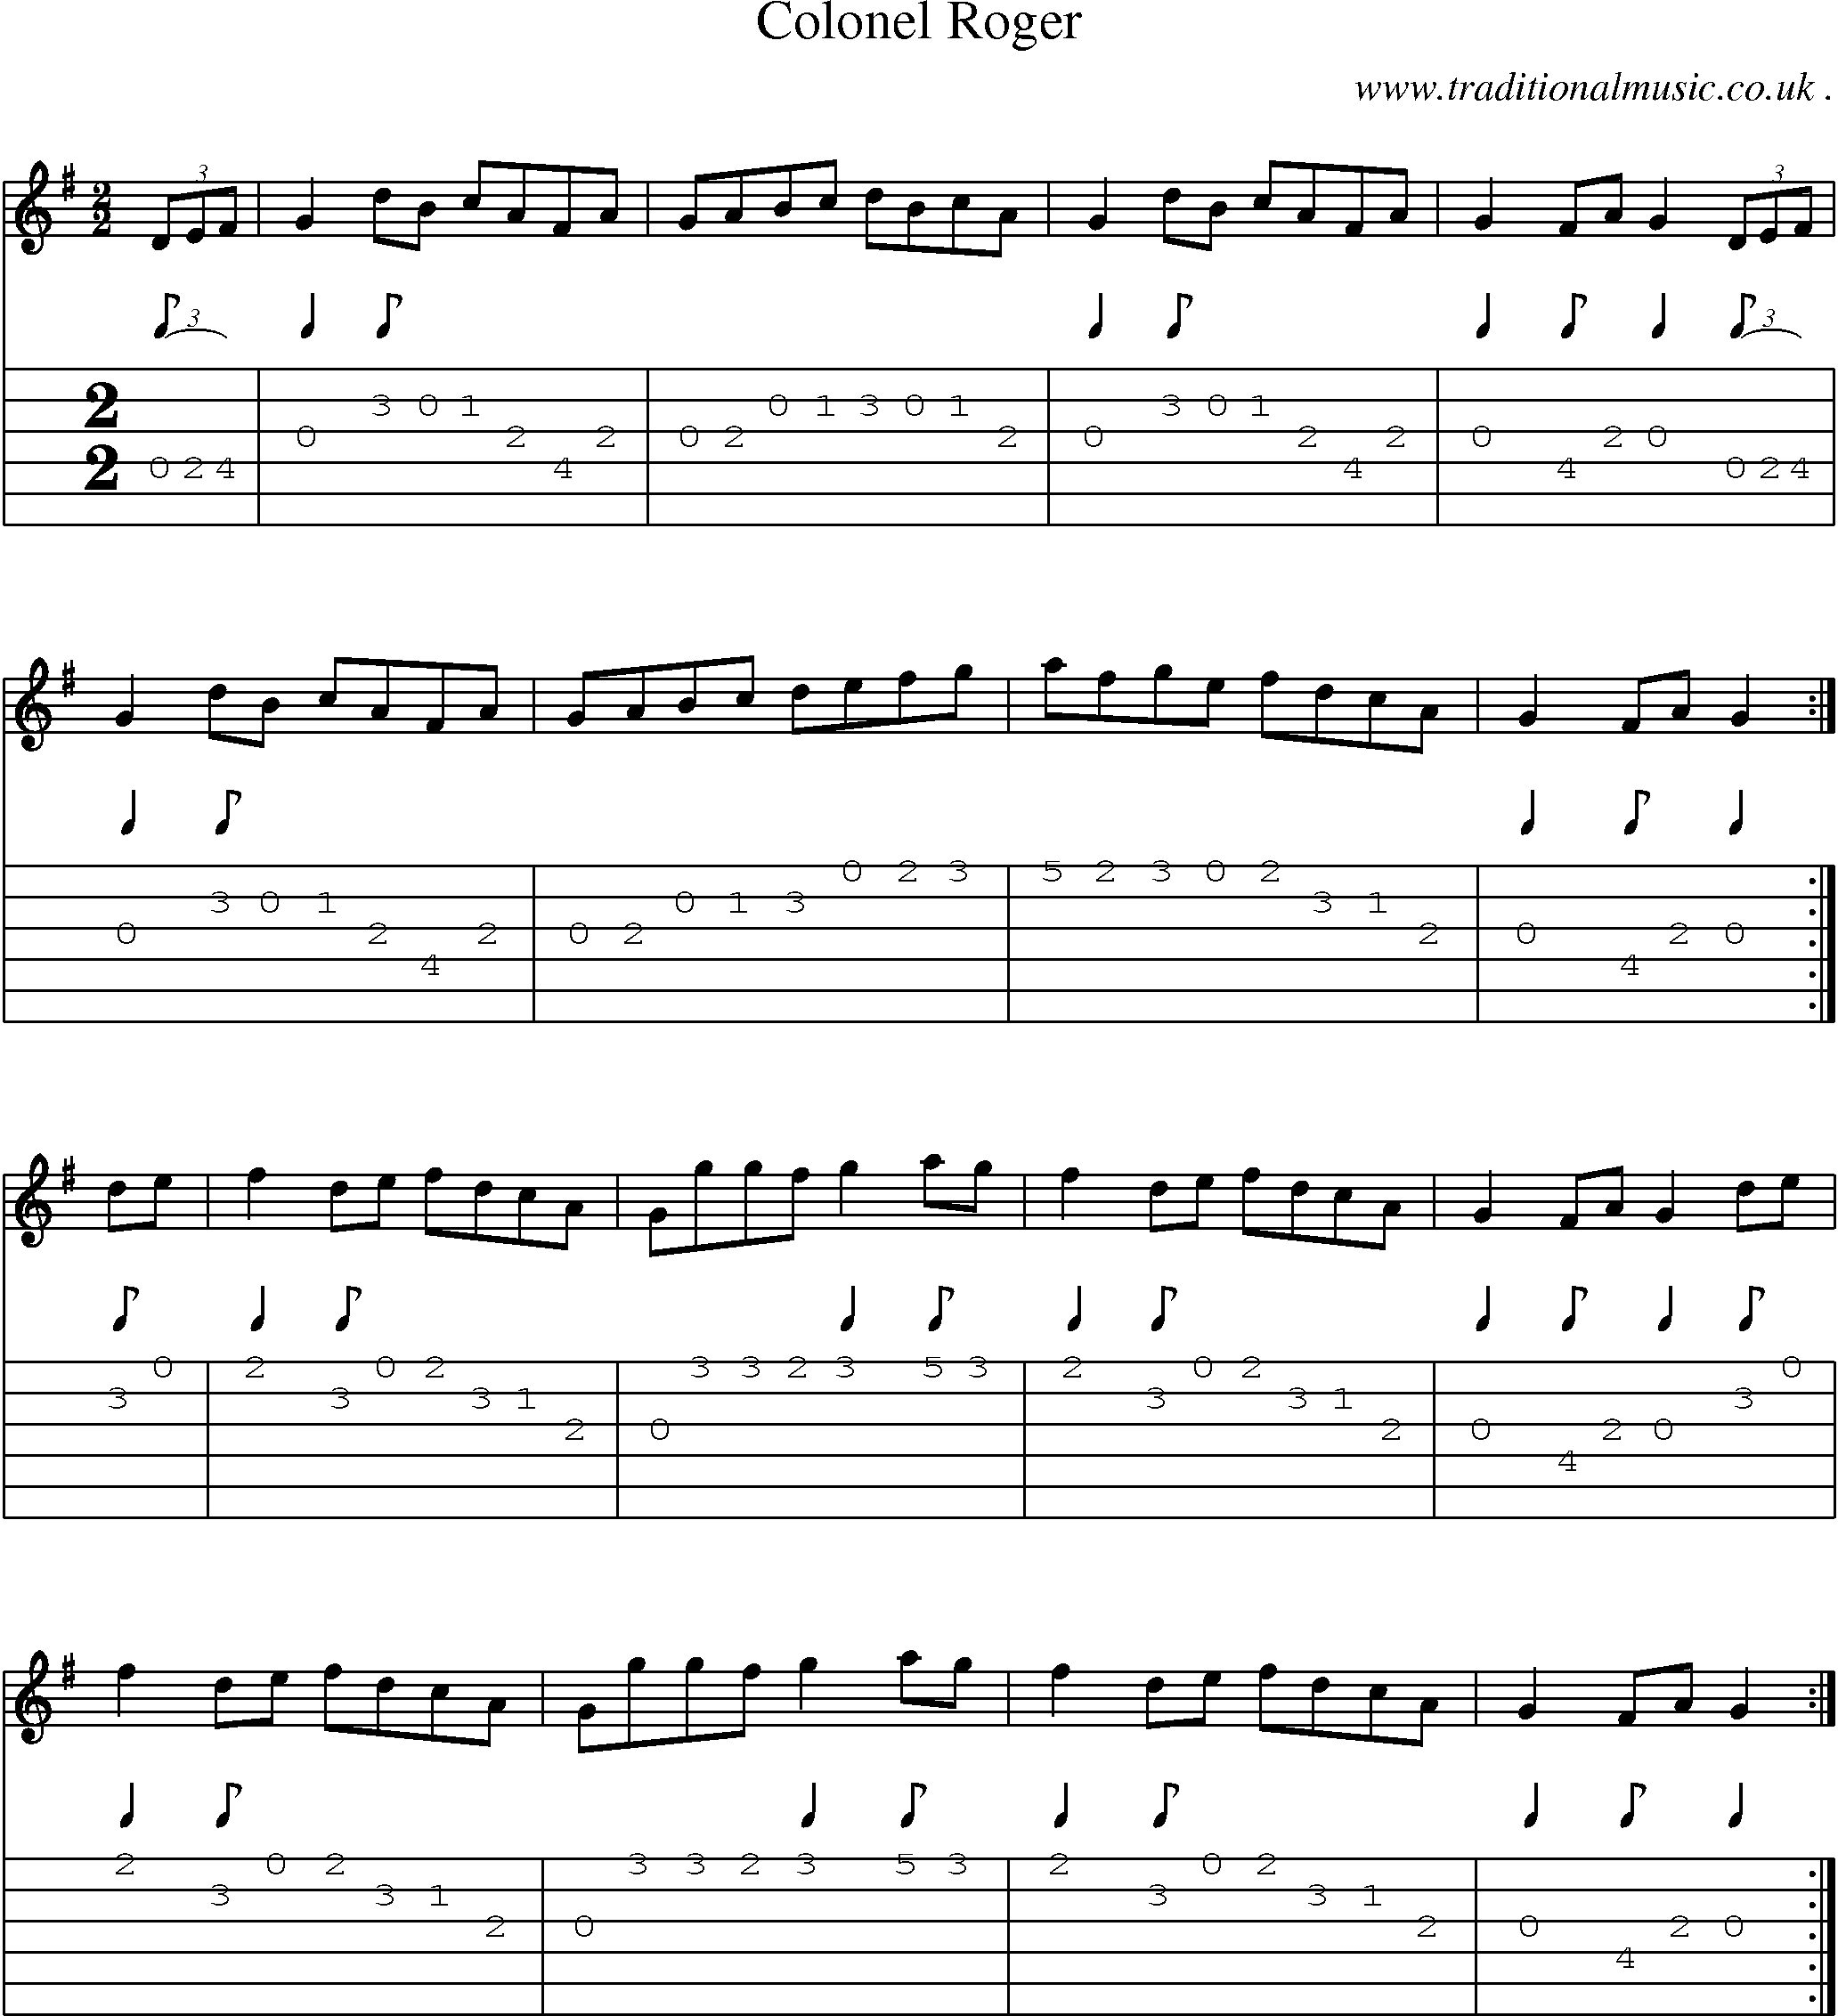 Sheet-Music and Guitar Tabs for Colonel Roger